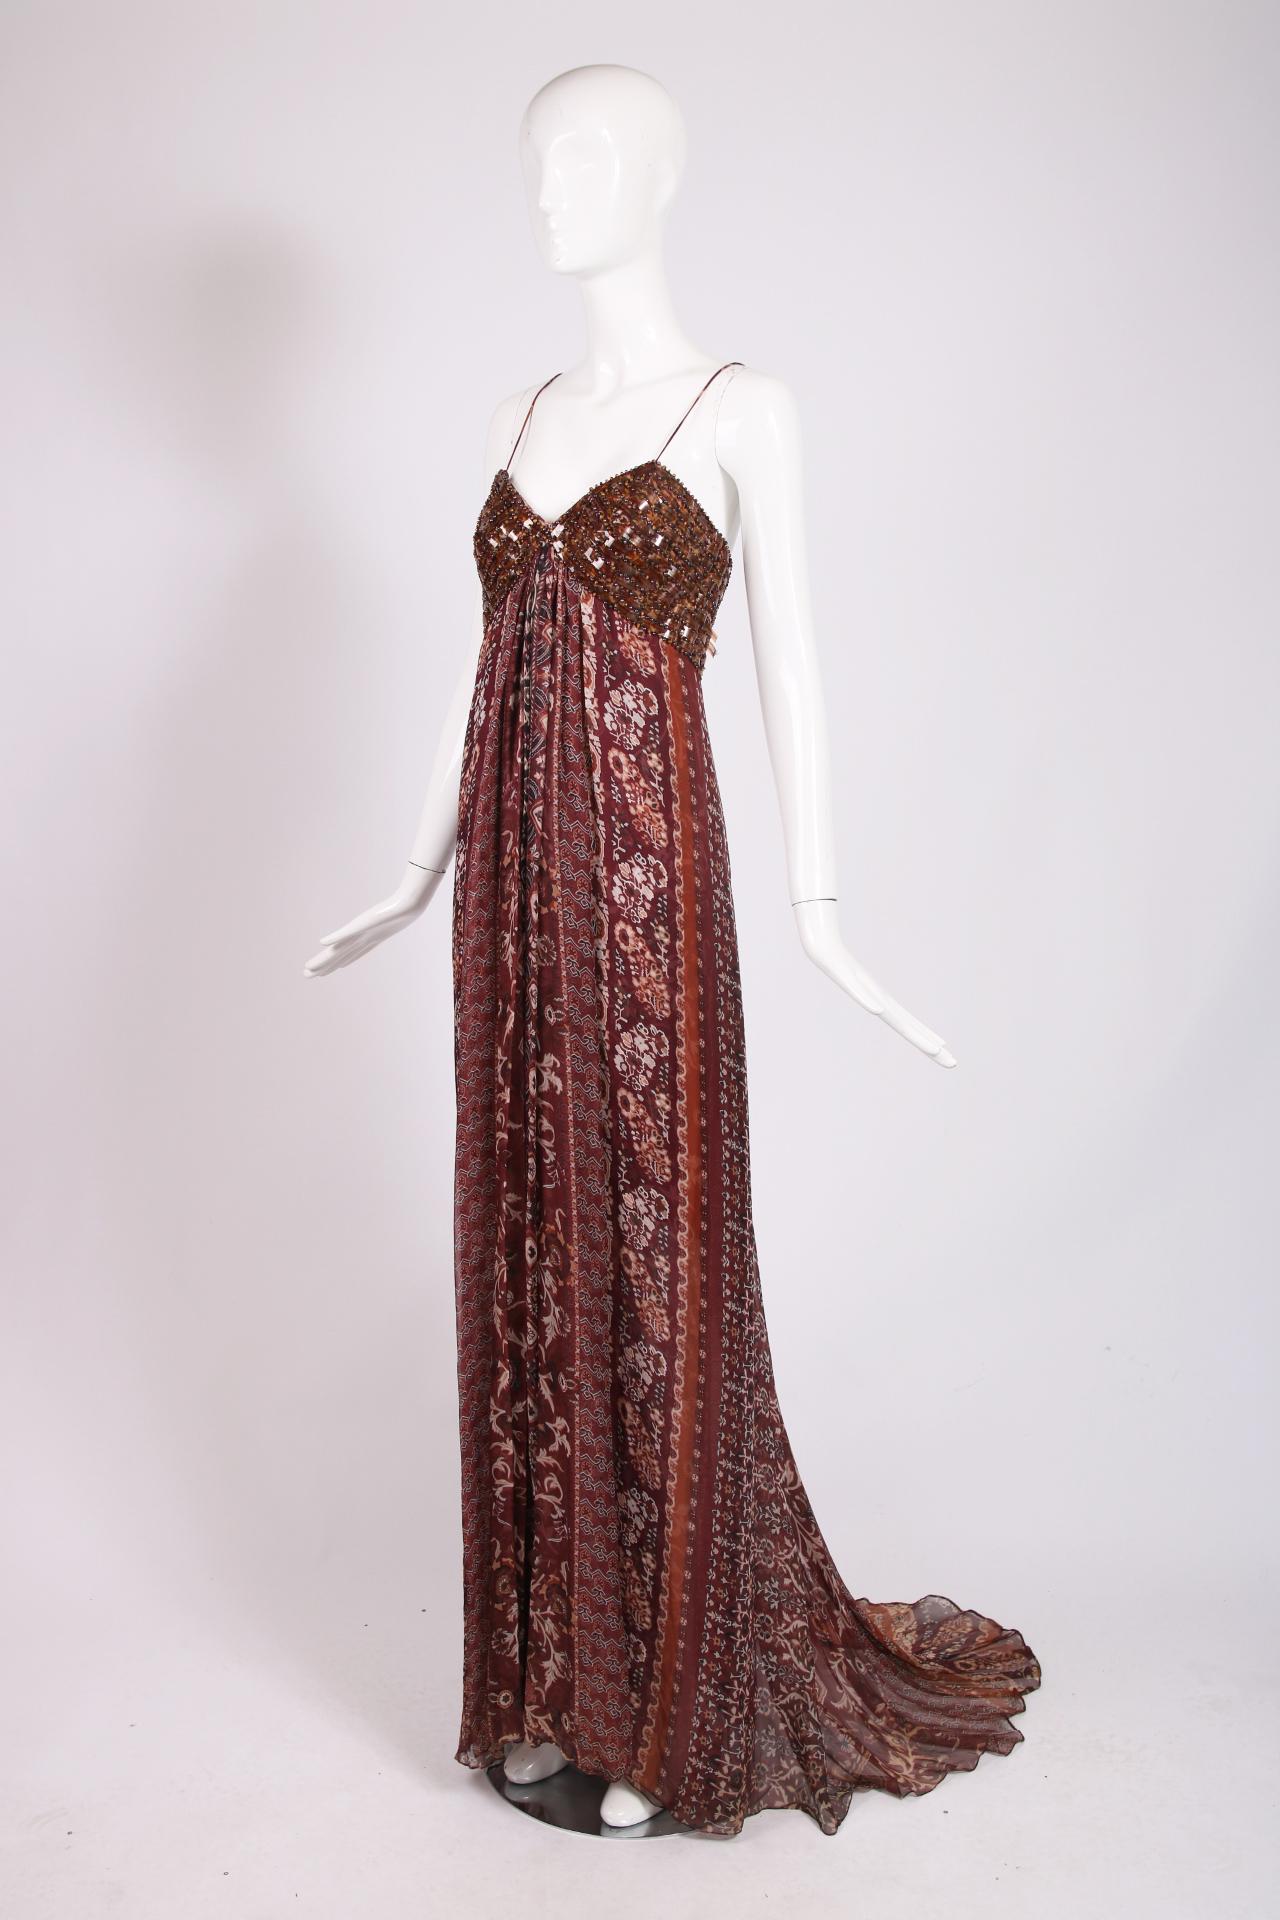 Late 1990's Oscar de la Renta strapless evening gown featuring spaghetti straps, a beaded and embroidered bodice and a skirt comprised of multiple layers of a foliate printed chiffon in a palette of burgundy, rust and brown. There is a small train